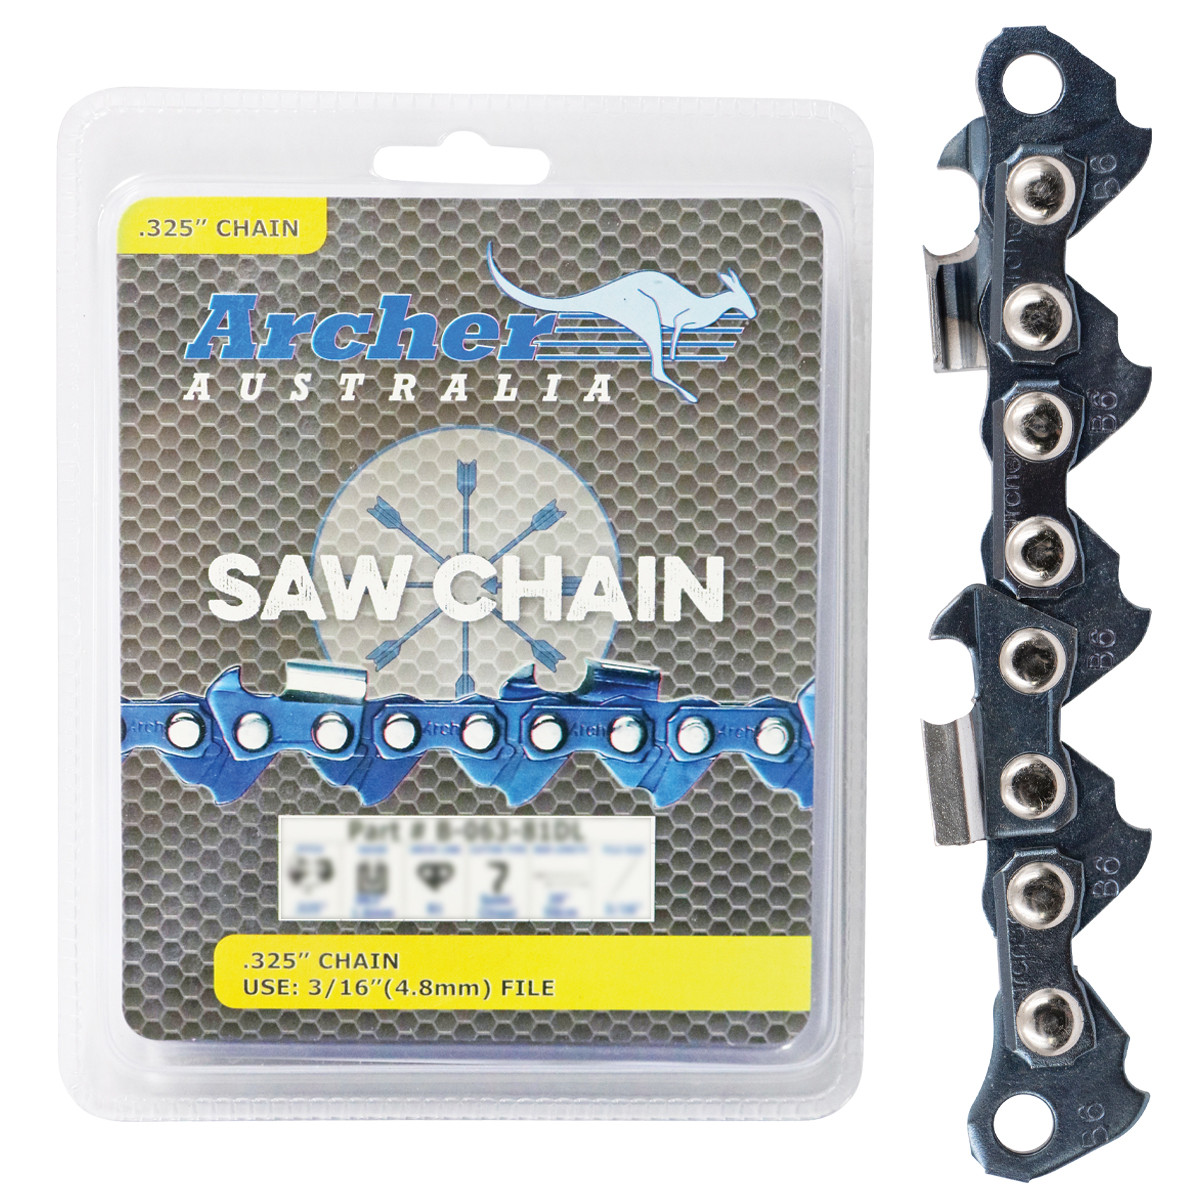 ARCHER PROFESSIONAL FULL CHISEL CHAINSAW CHAIN 18" .325 .058 72DL 